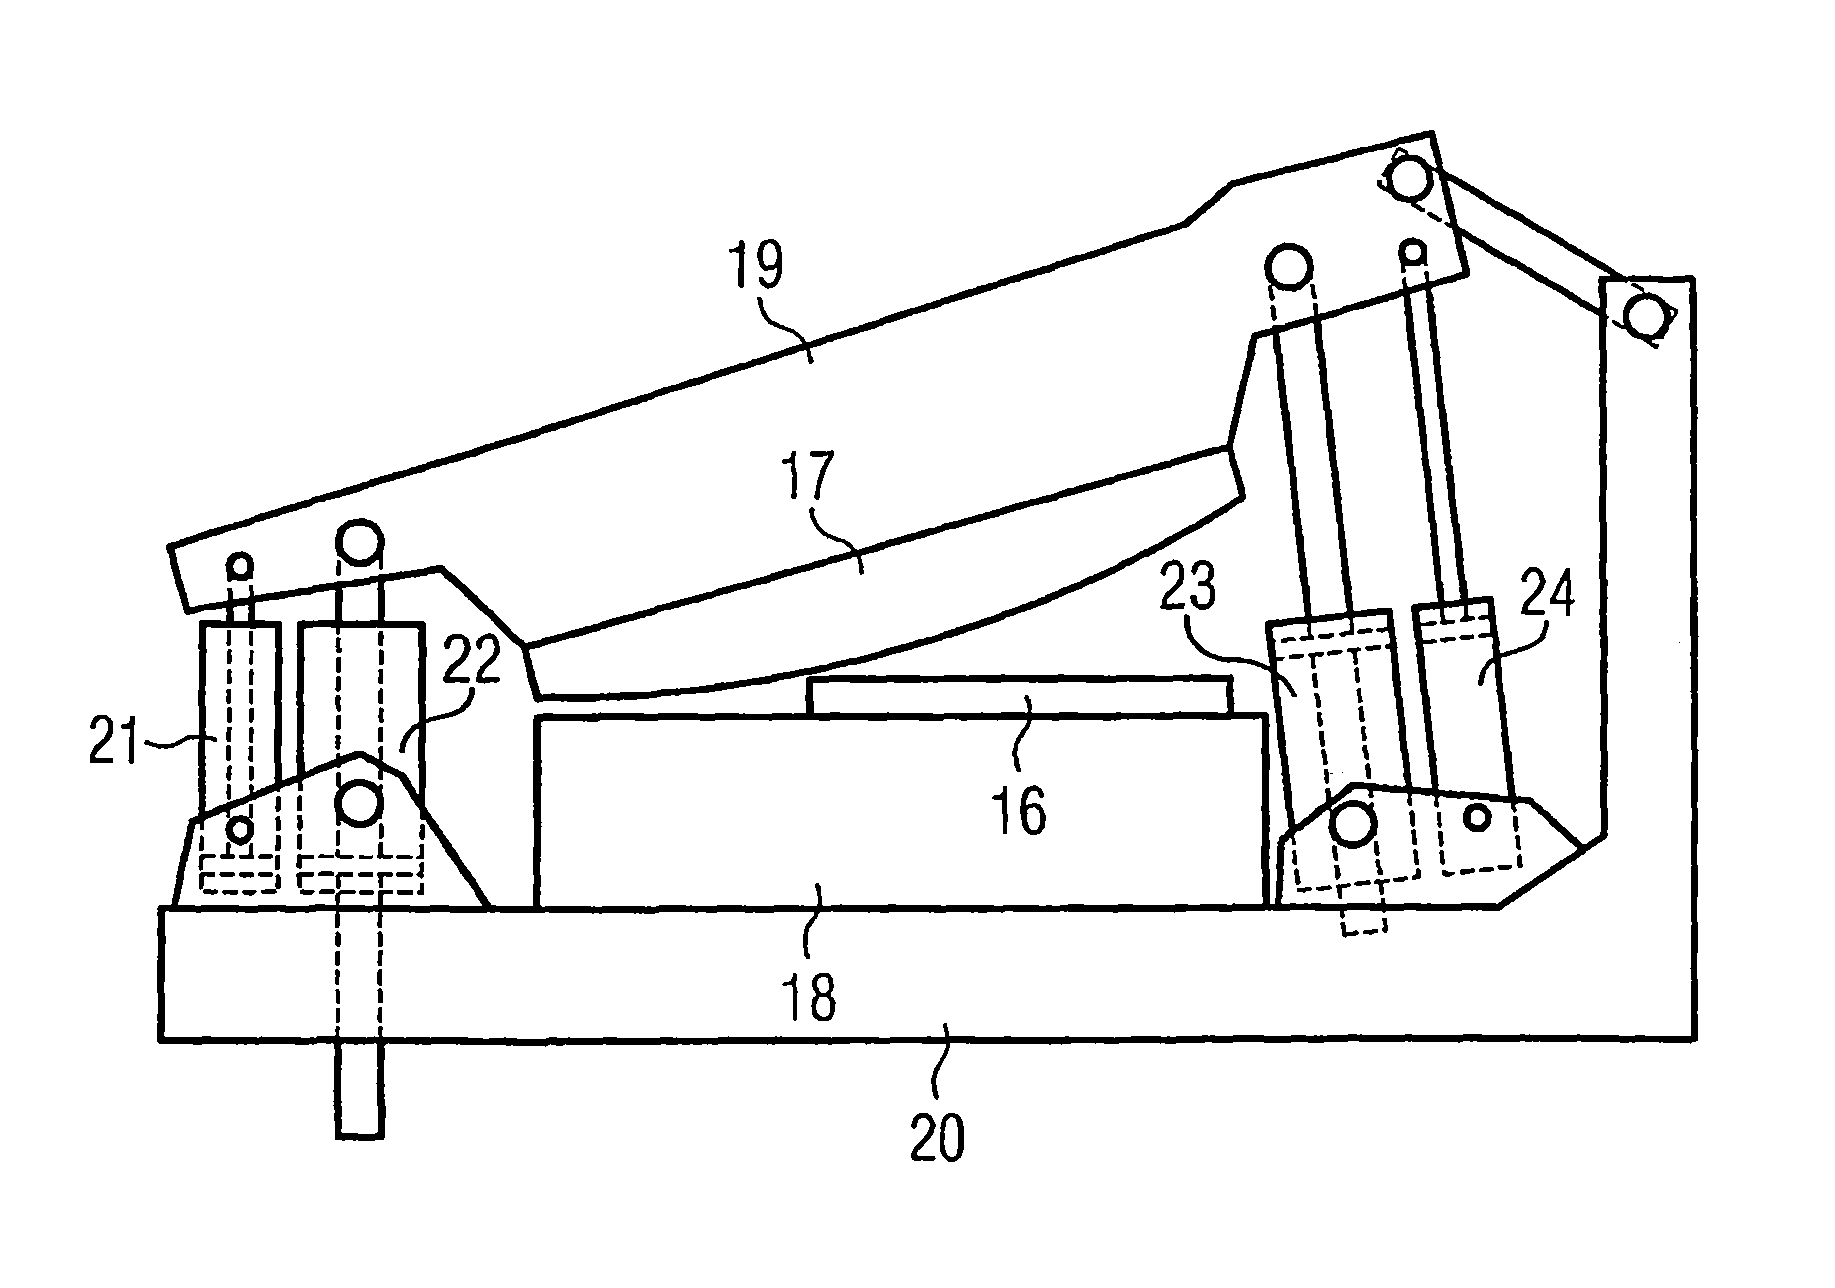 Multiple actuating-force shearing machine